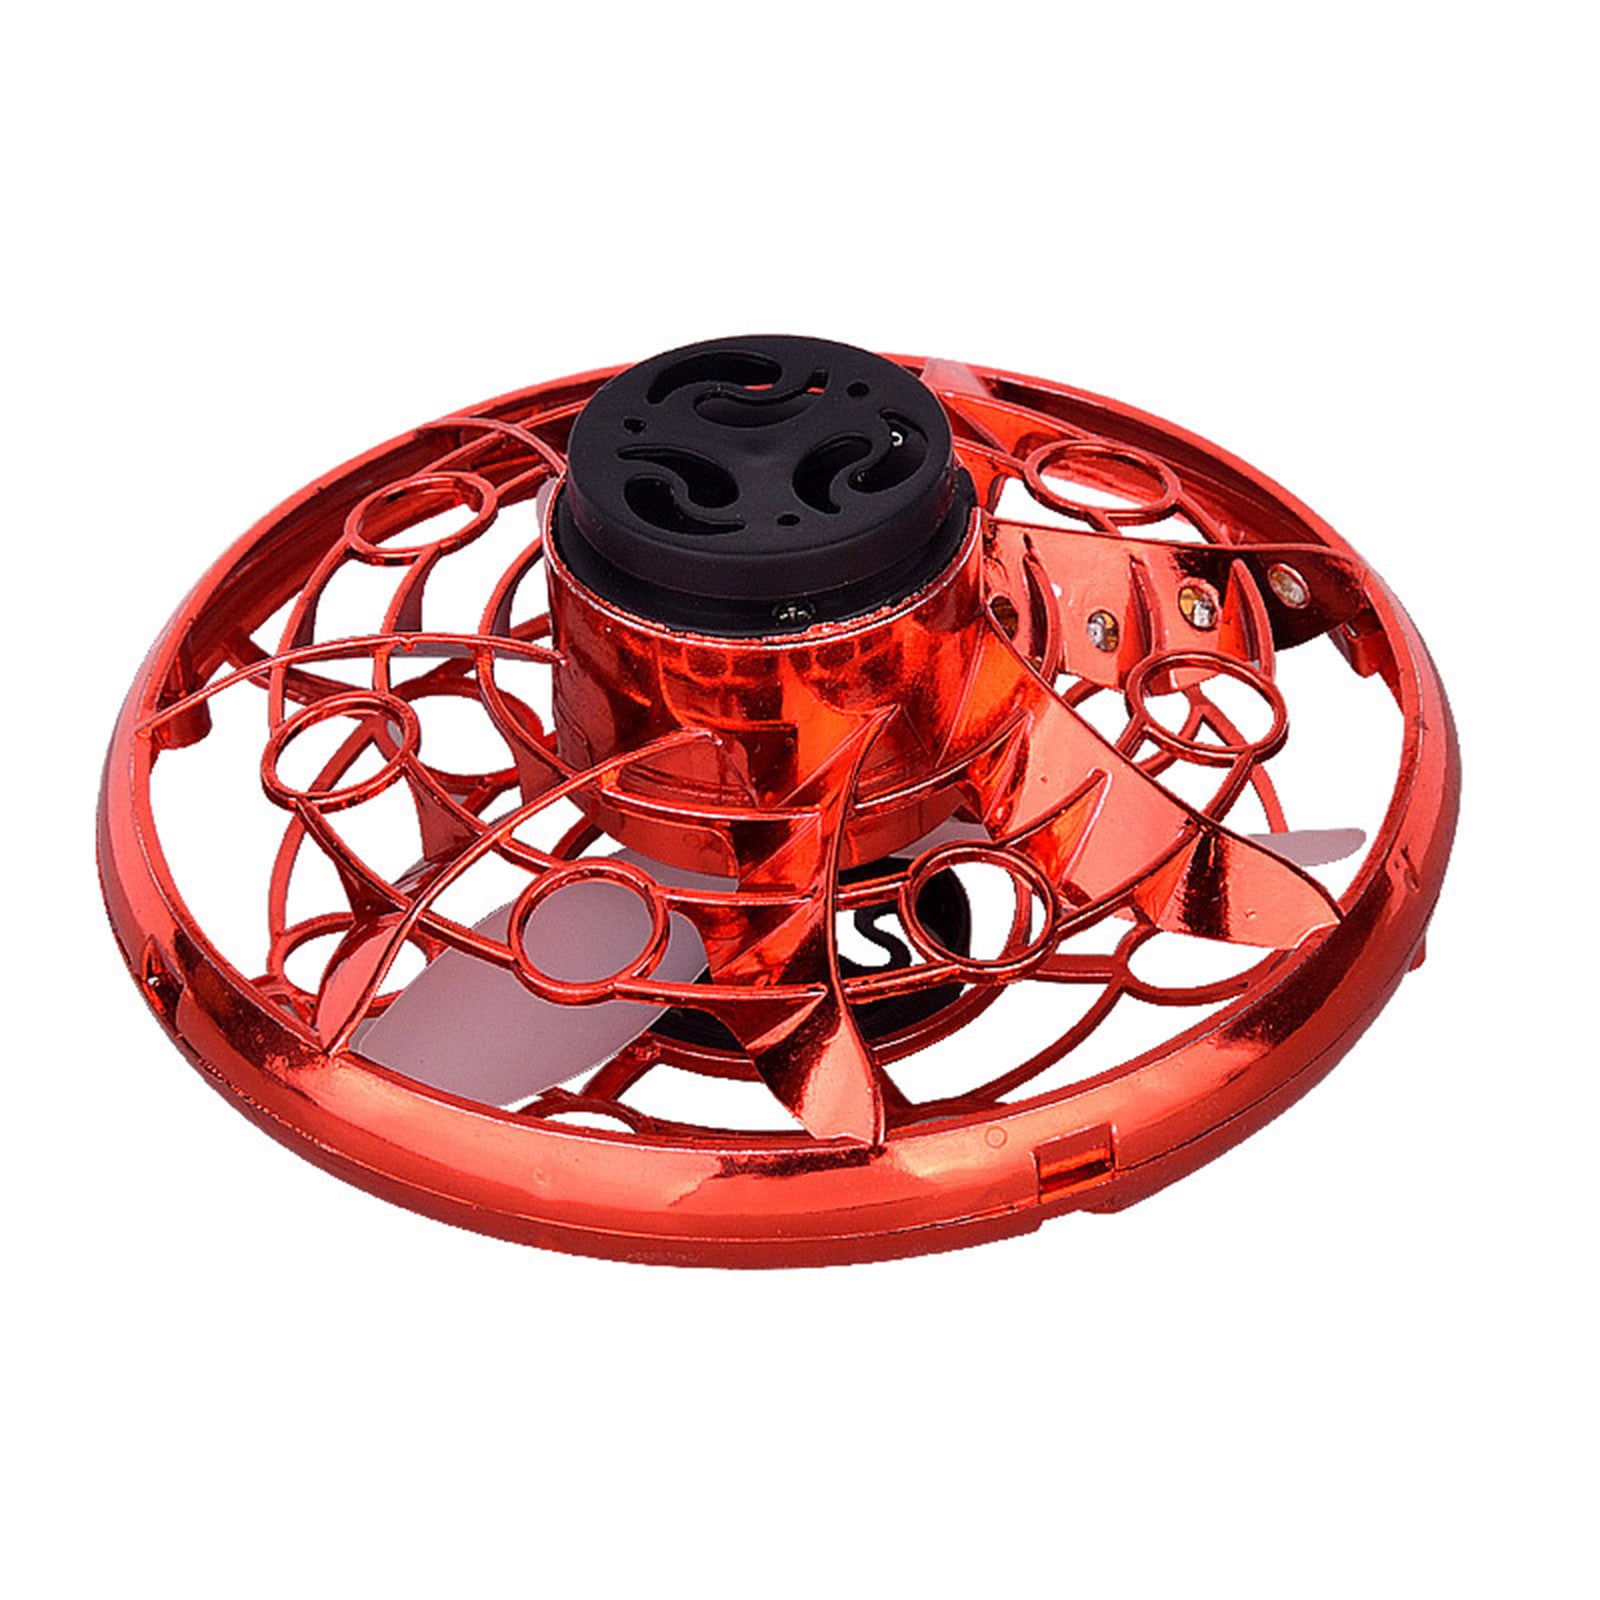 360° Mini Drone Smart UFO Aircraft for Kids Flying Toys  Infrared Hand Sensor 